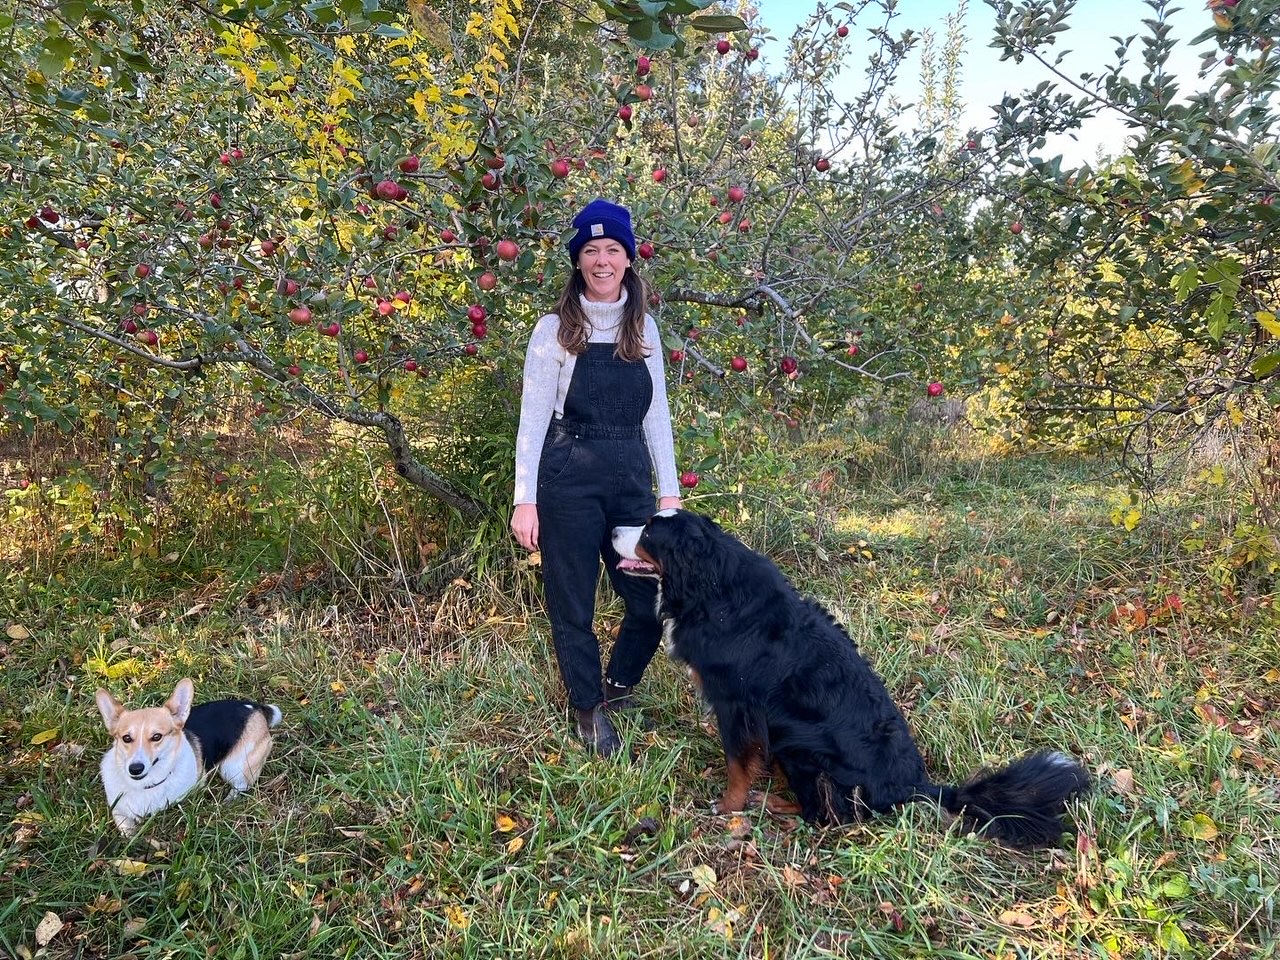 Molly Oberg poses with her farm dogs Sheeba and Violet on the Meyer Produce farm in the apple orchard. Photo by Alyssa Buckley.